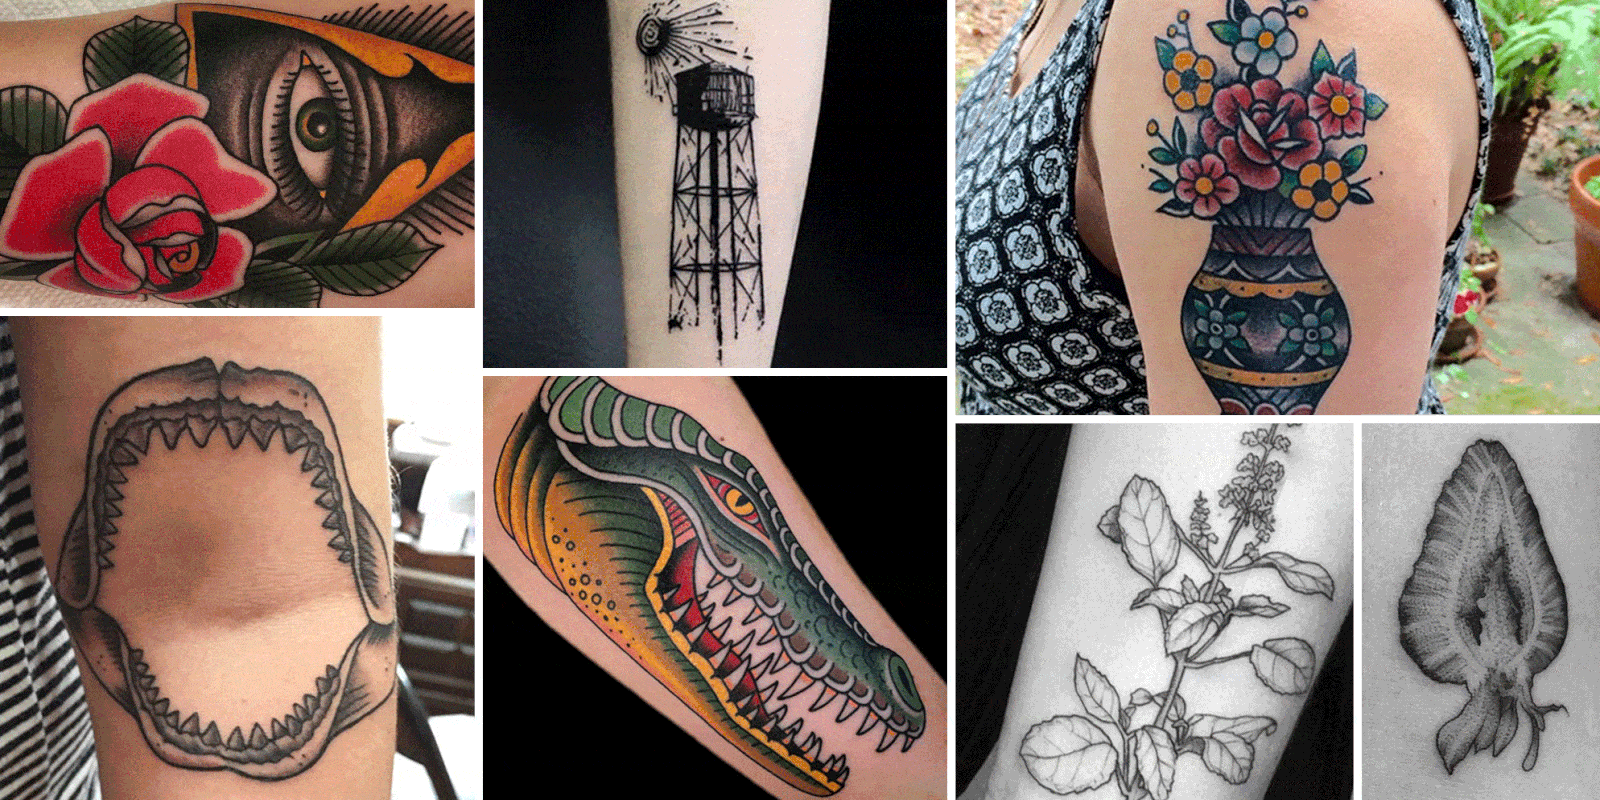 What Causes Tattoos To Fade? – Stories and Ink